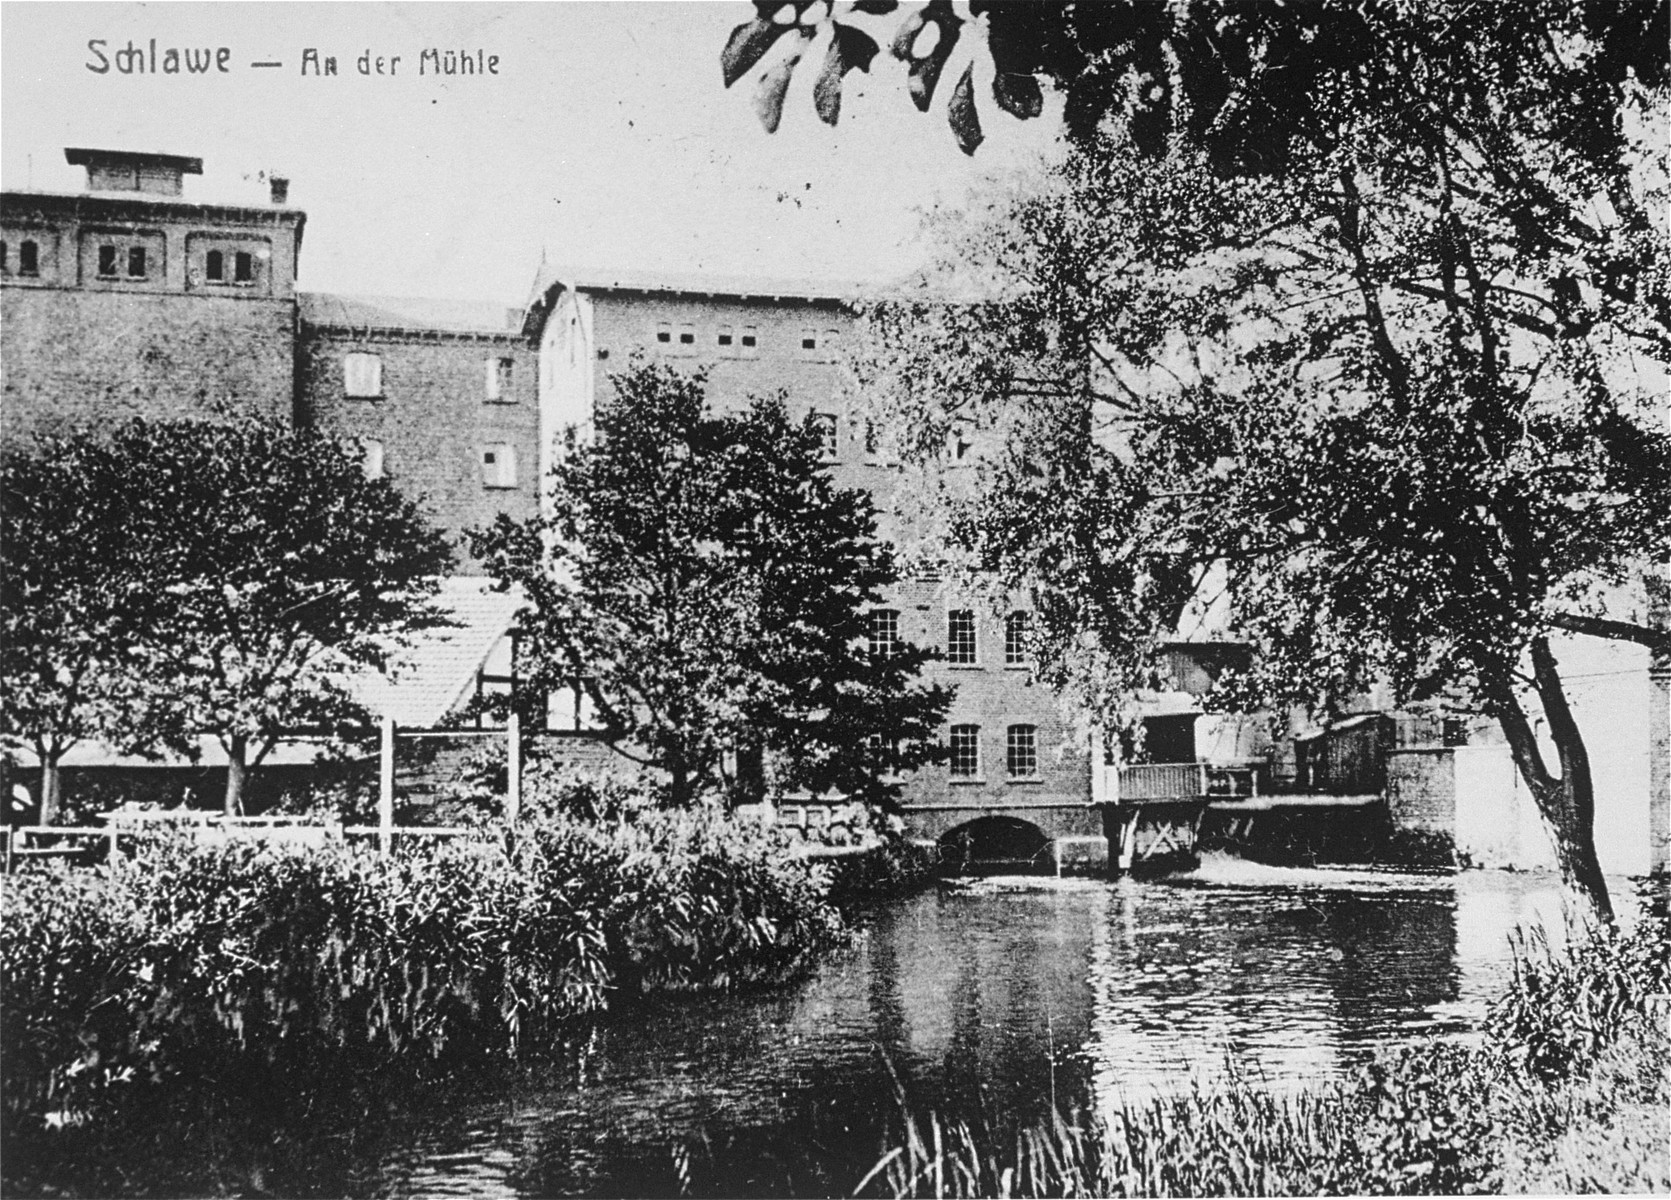 View of the Schlawer Muhlenwerke, a mill owned and operated by Hugo Gottschalk.  

The mill was founded in 1872 by Benjamin Gottschalk (1834-1902).  His son, Hugo, took over the mill after his death.  The mill remained in the hands of the Gottschalk family until 1923, when it was sold to the city of Schlawe.